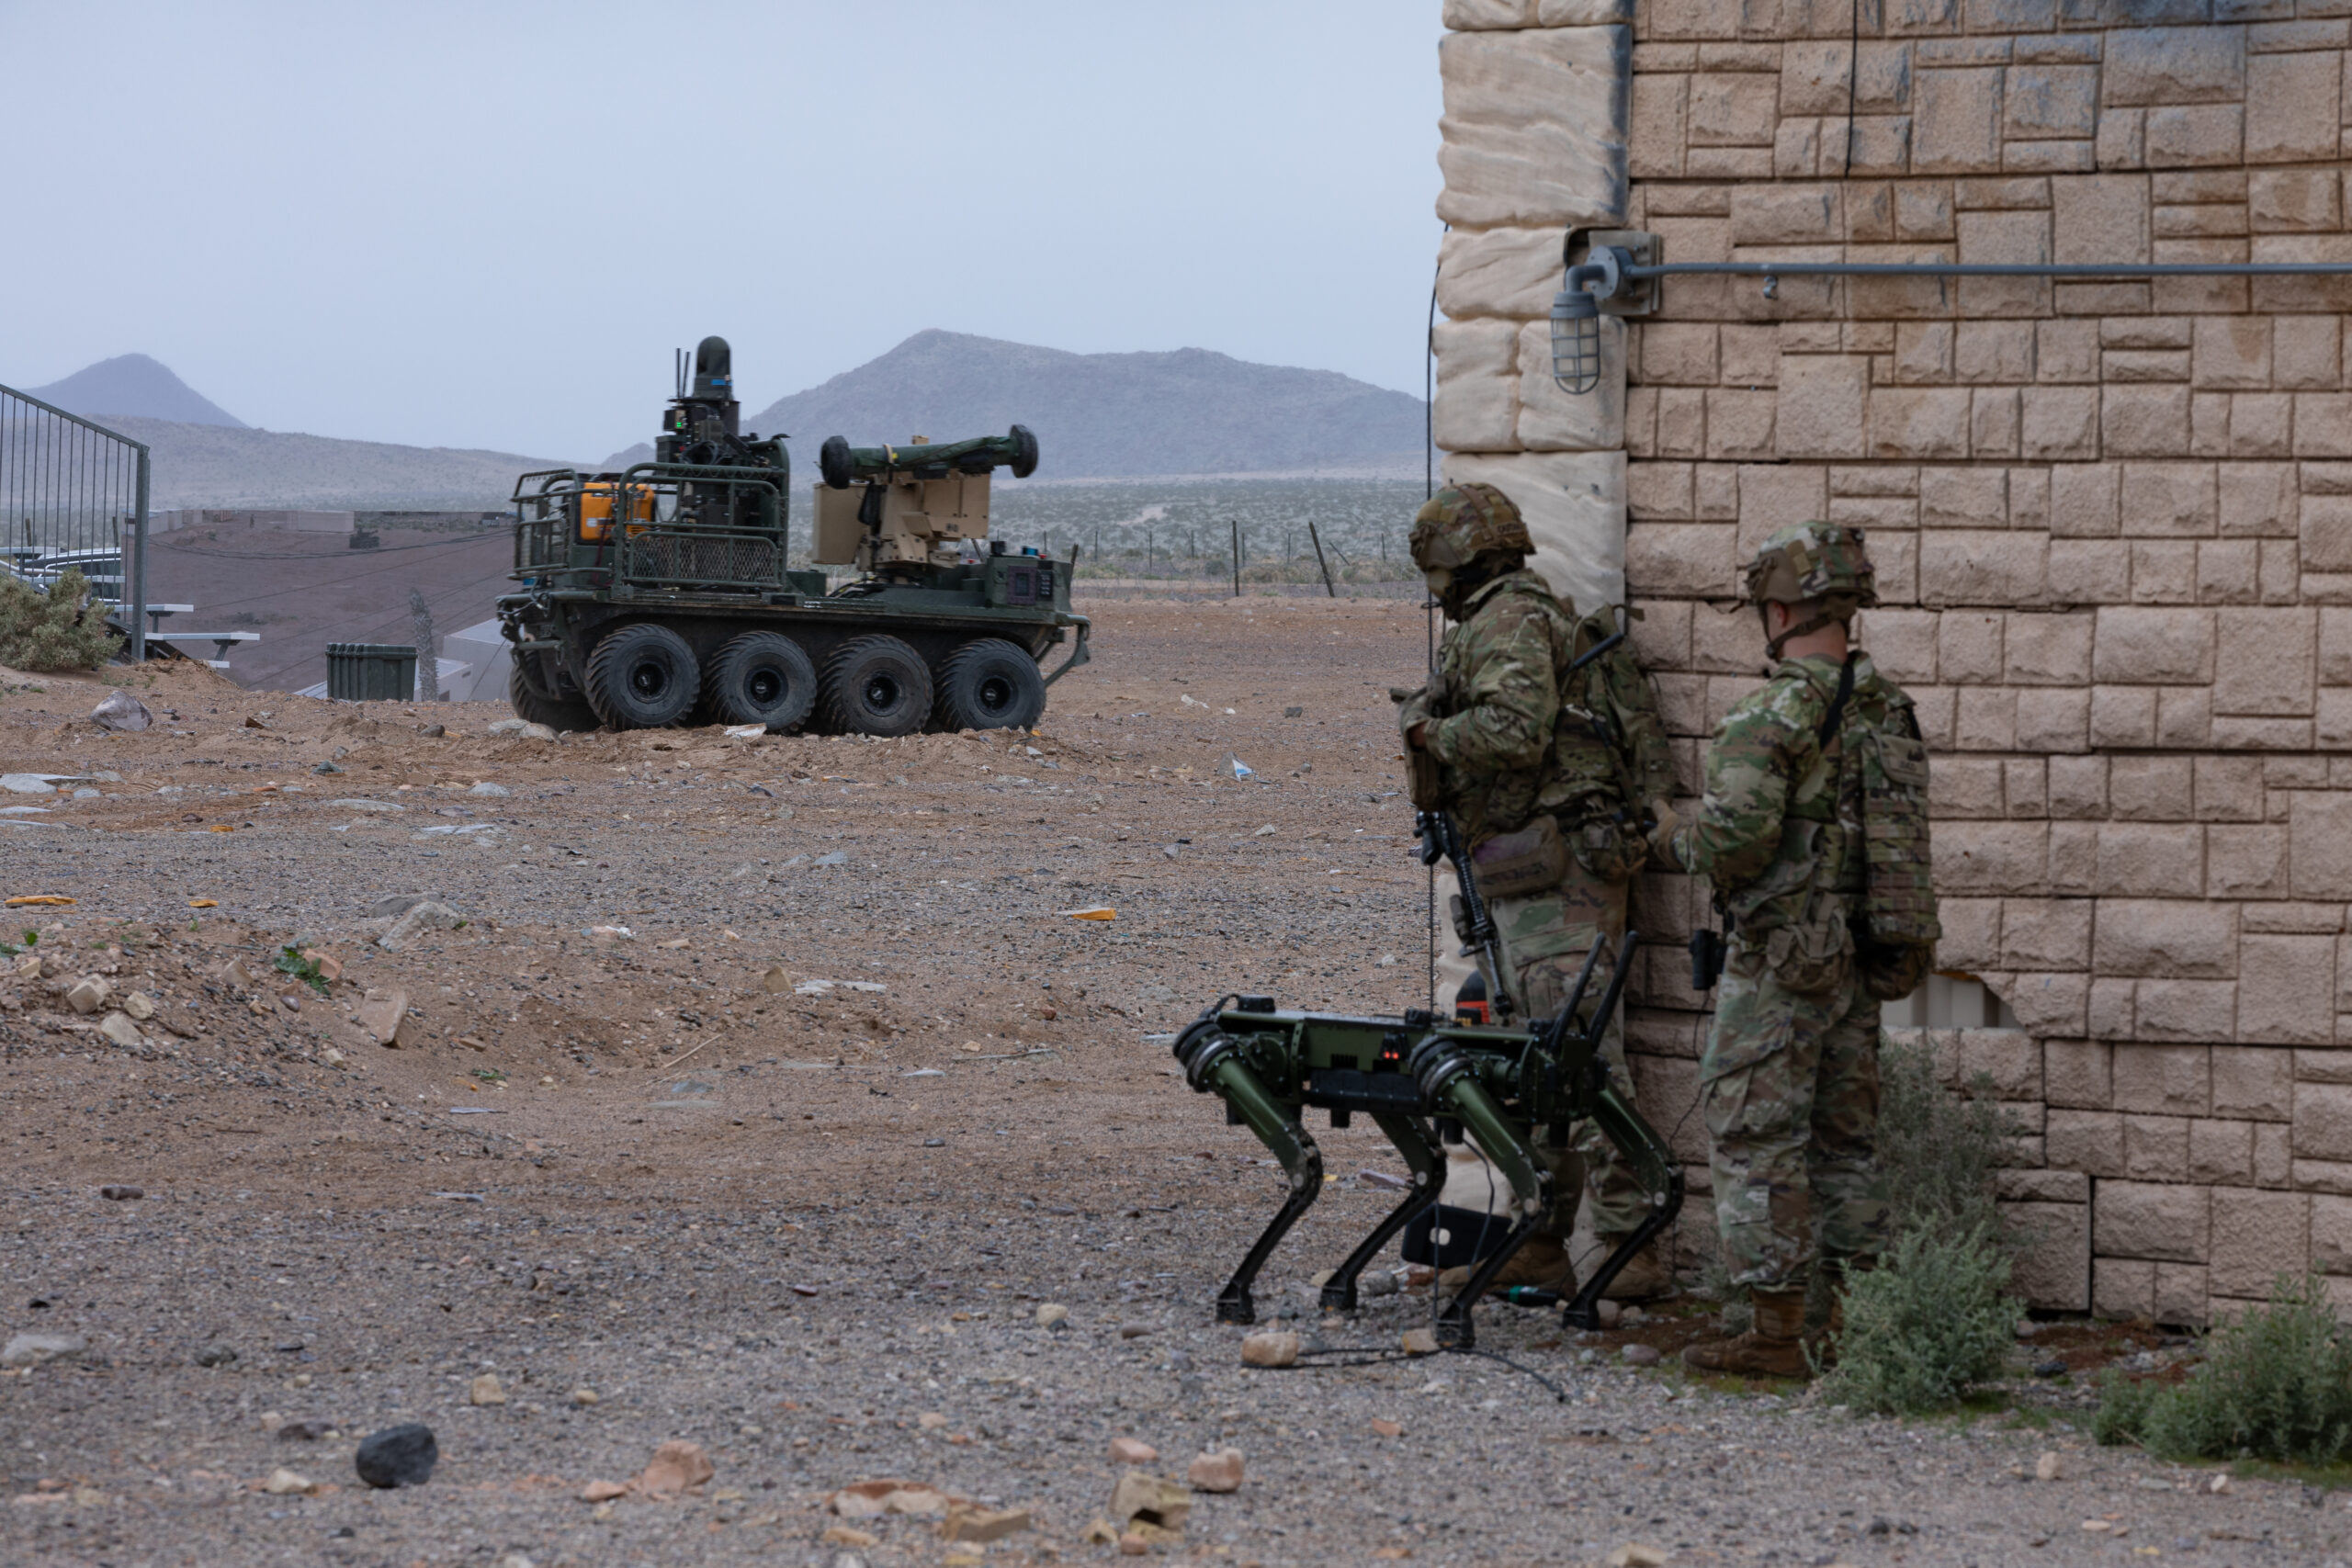 U.S. Soldiers assigned to the 1st Battalion, 29th Infantry Regiment, based out of Fort Moore, Ga., take part in a human machine integration demonstration using the Ghost Robotic Dog, and the U.S. Army Small Multipurpose Equipment Transport (SMET) of new U.S. Army capabilities at Project Convergence - Capstone 4 in Fort Irwin, Calif., March 15, 2024. The robotic dog is a mid-sized, high-endurance, agile unmanned ground vehicle that provides enhanced reconnaissance and situational awareness supporting Soldiers on the ground. The SMET is an eight-wheeled, enabling robotic technology serving as a “robotic mule” with a wide range of flexibility to operate in combat, combat support and combat service support operations. (U.S. Army photo by Spc. Samarion Hicks)